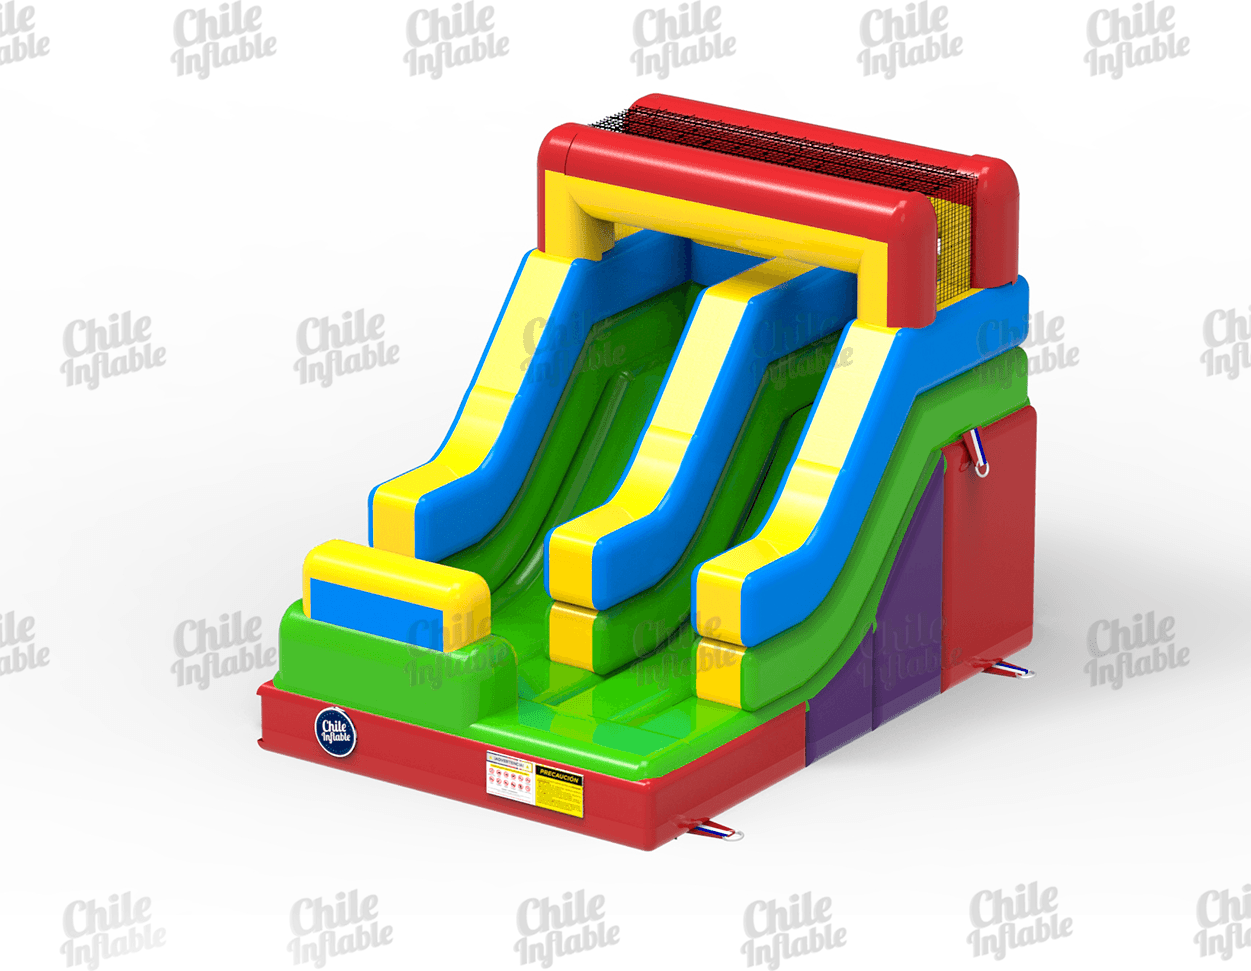 chileinflable